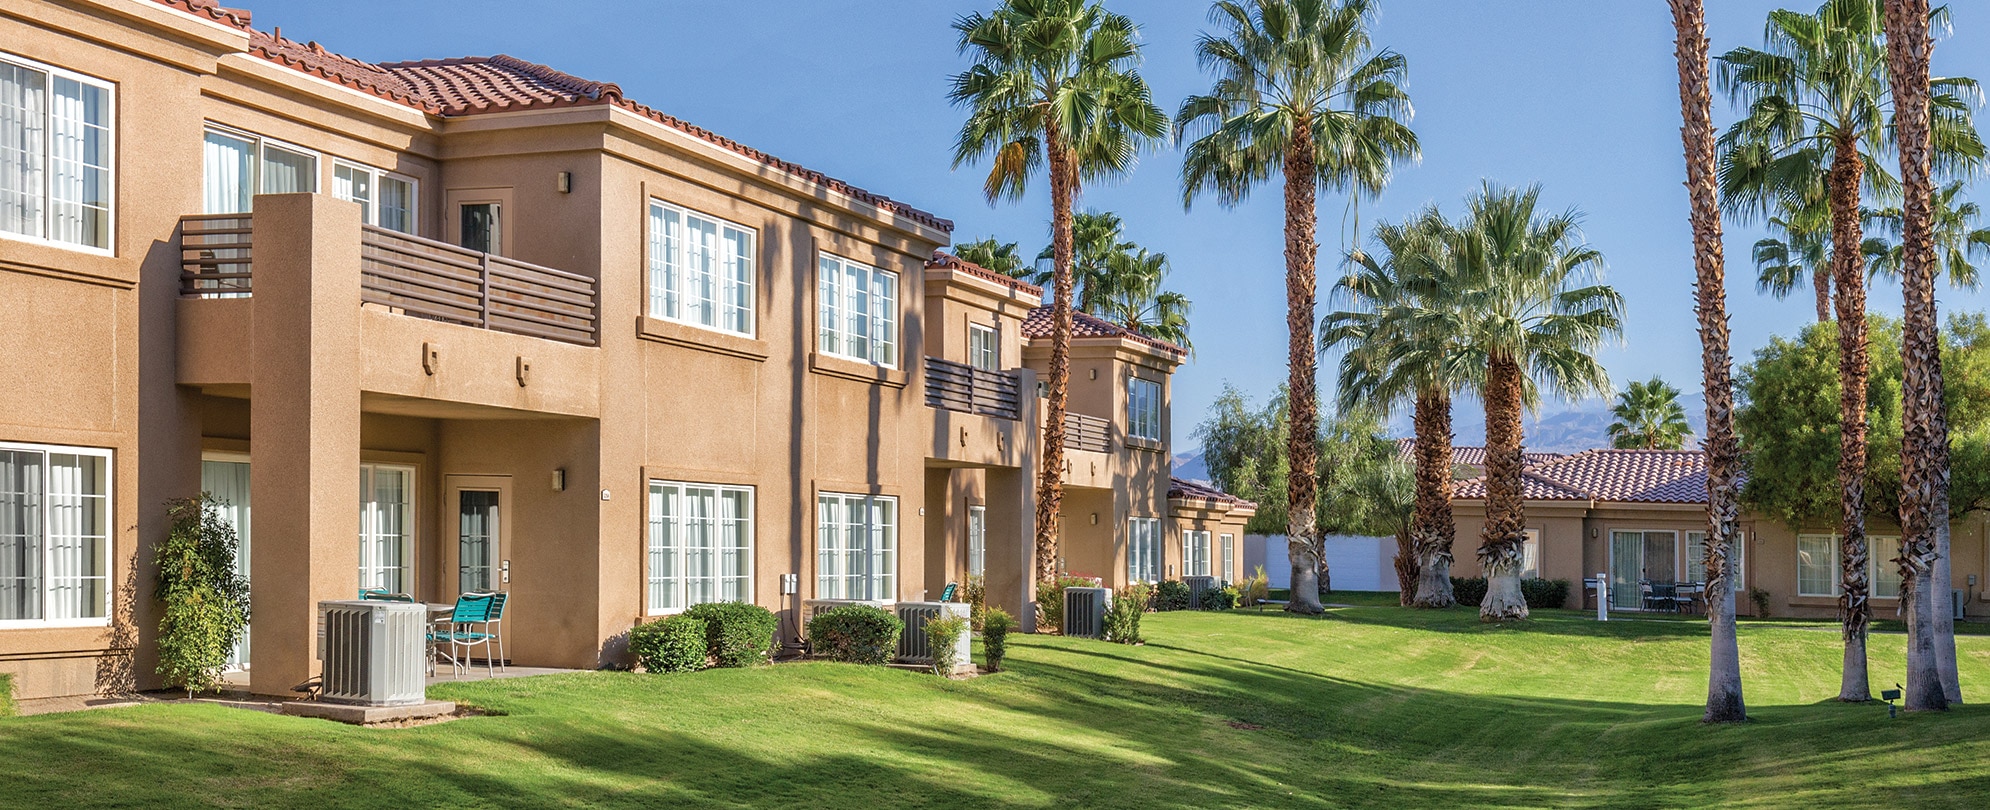 Palm trees surround the exterior of WorldMark Cathedral City, a timeshare resort in California.